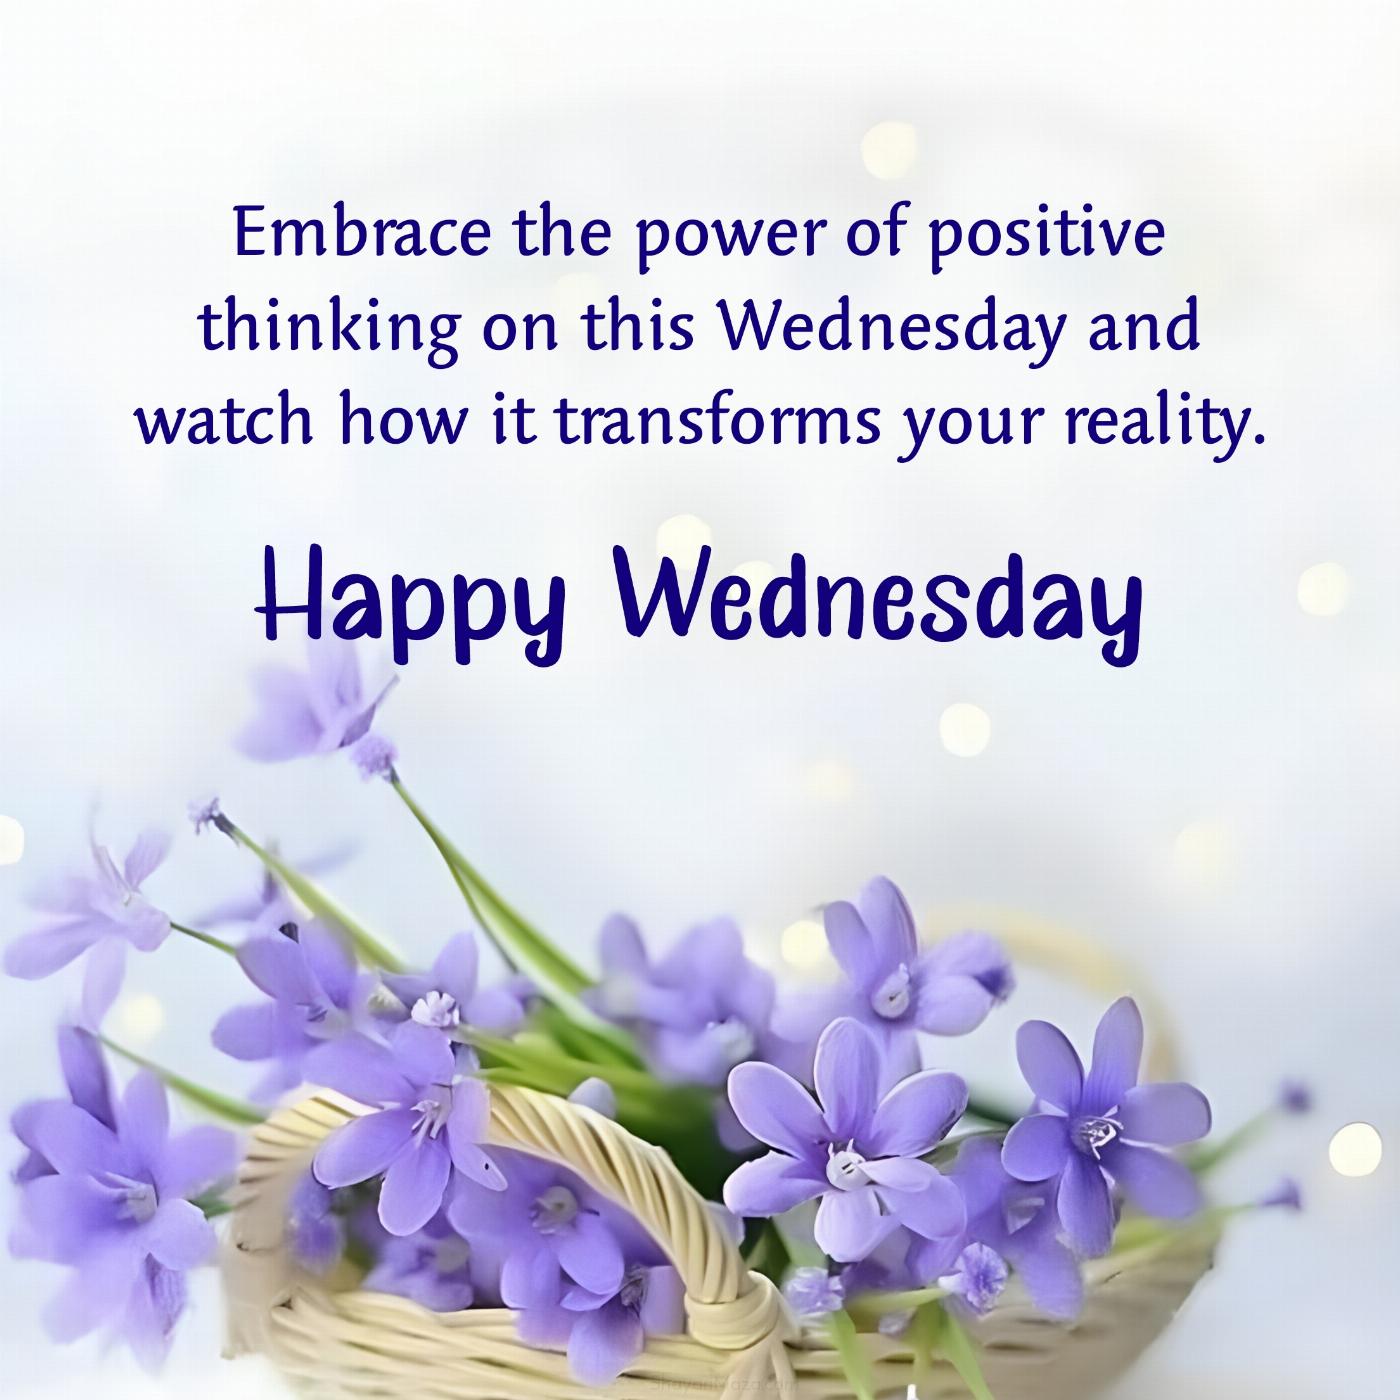 Embrace the power of positive thinking on this Wednesday